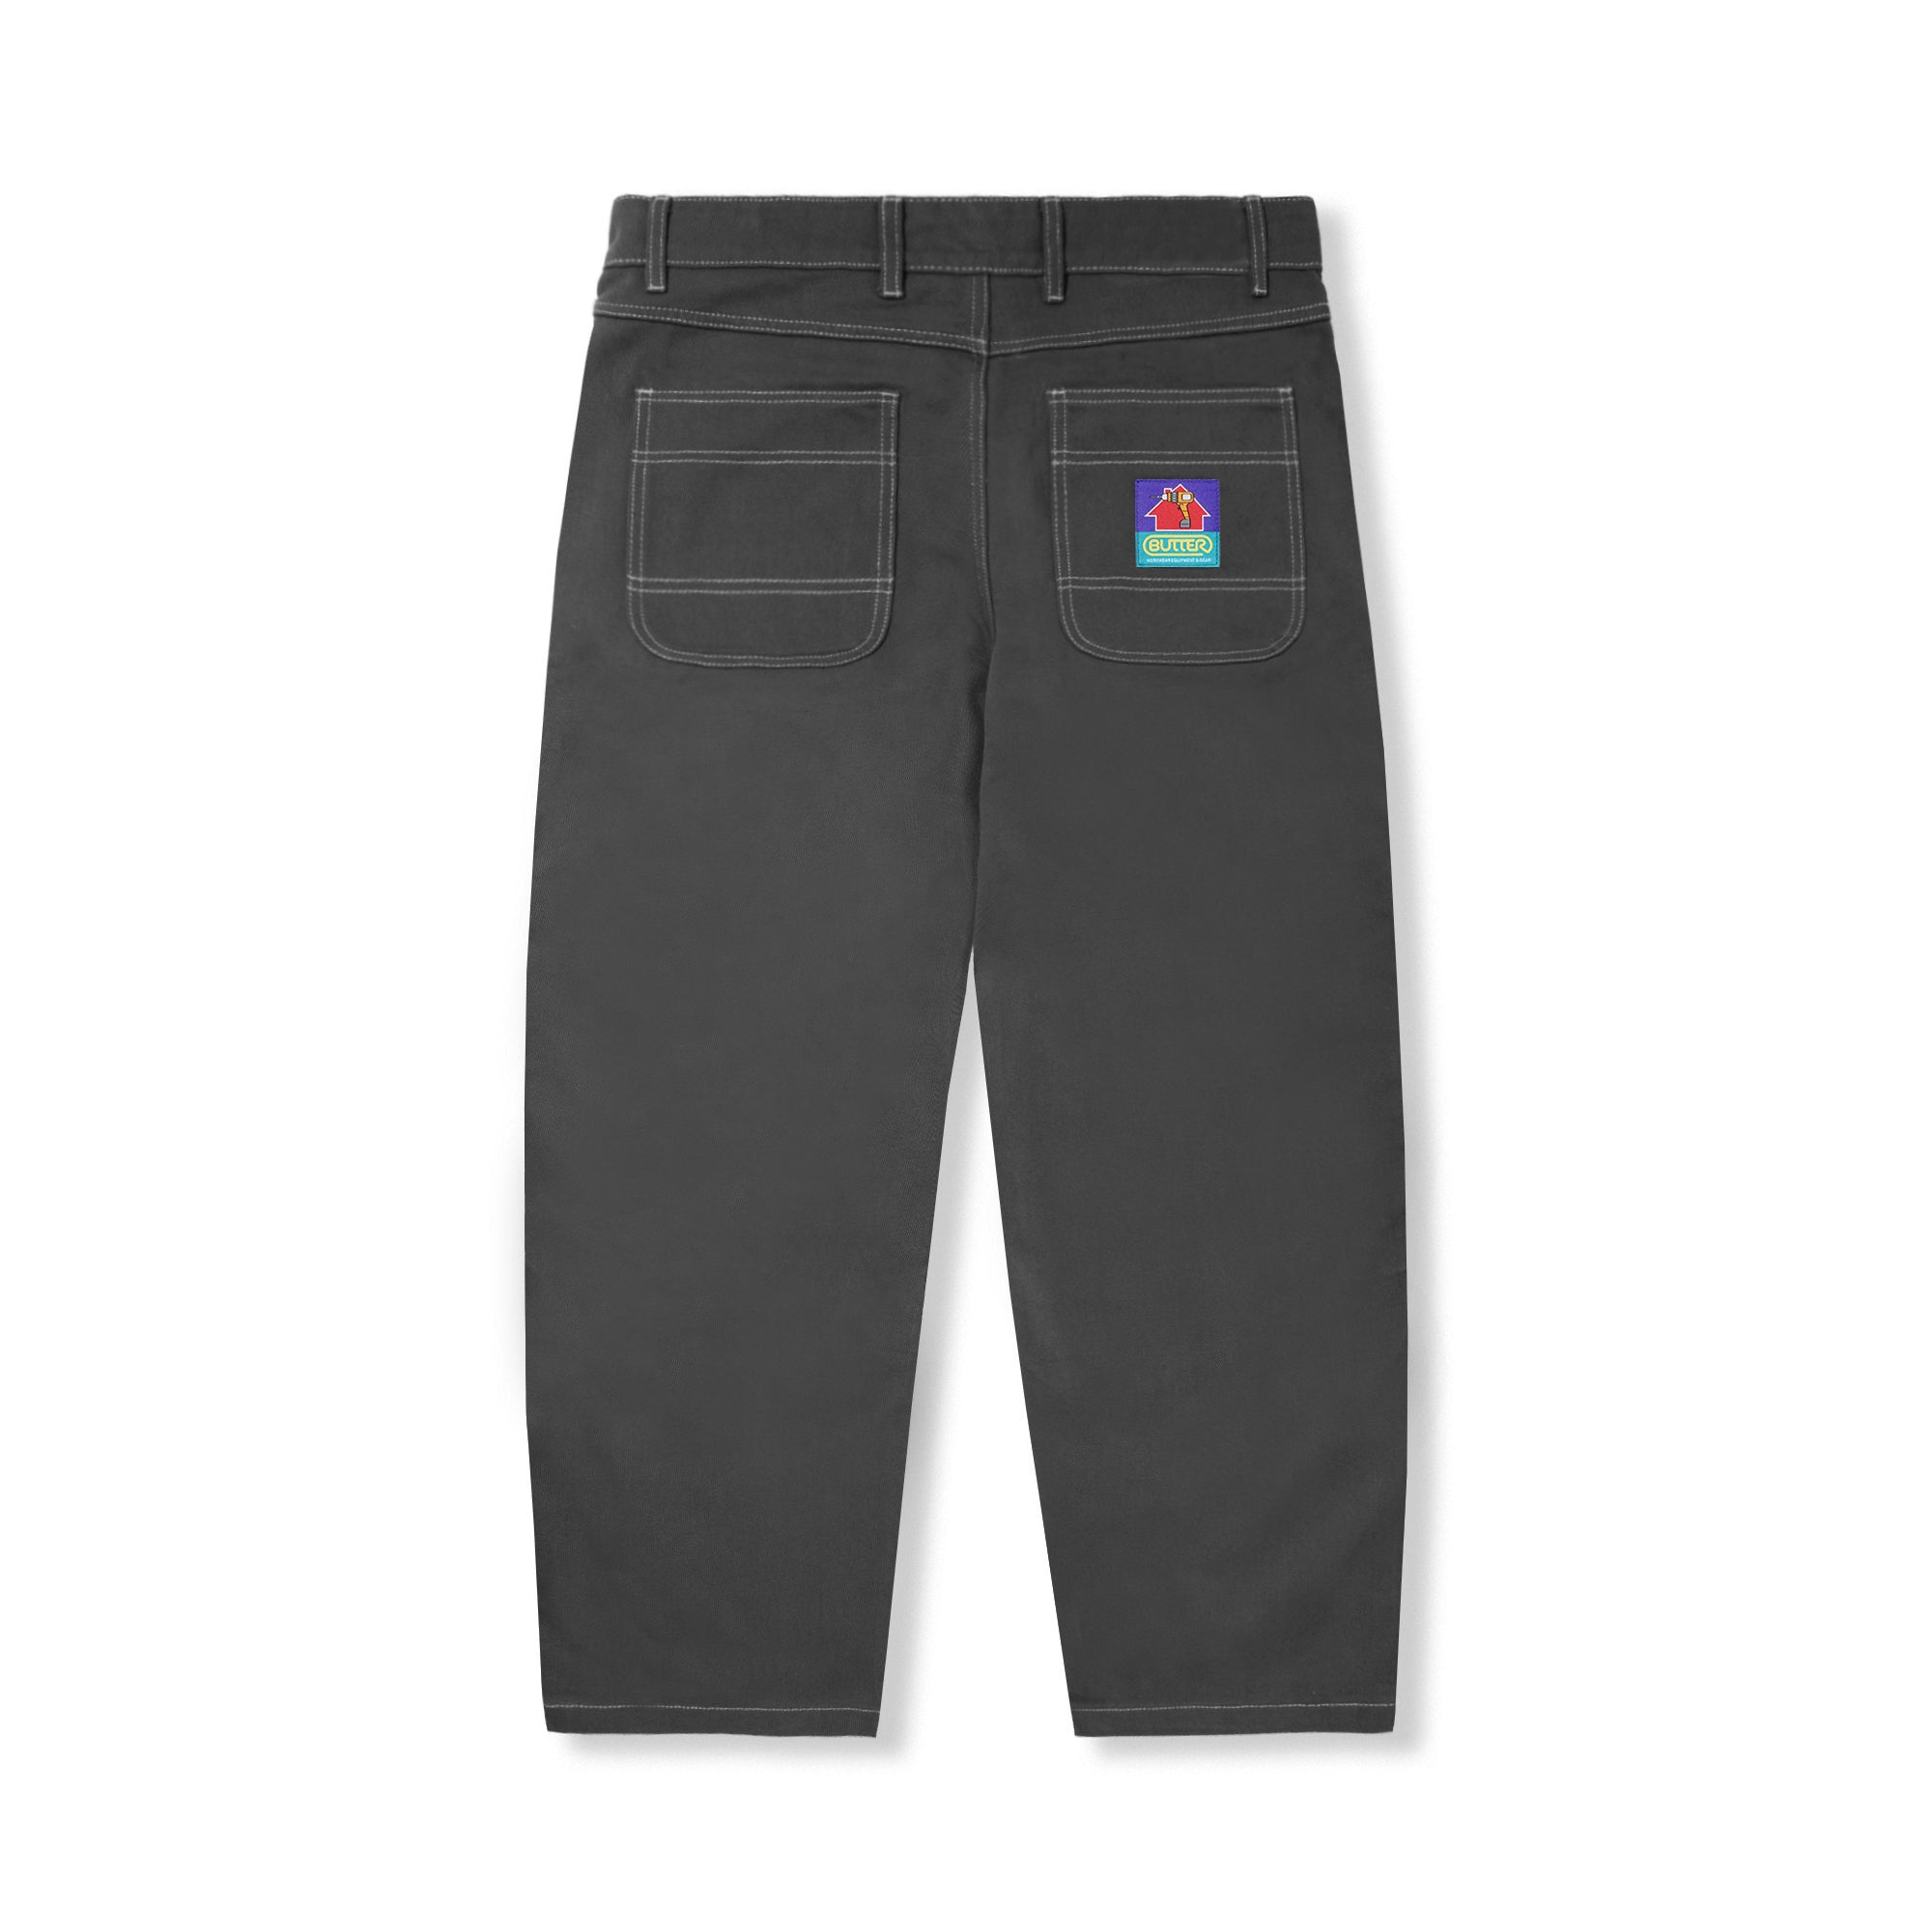 WORK DOUBLE KNEE PANT CHARCOAL